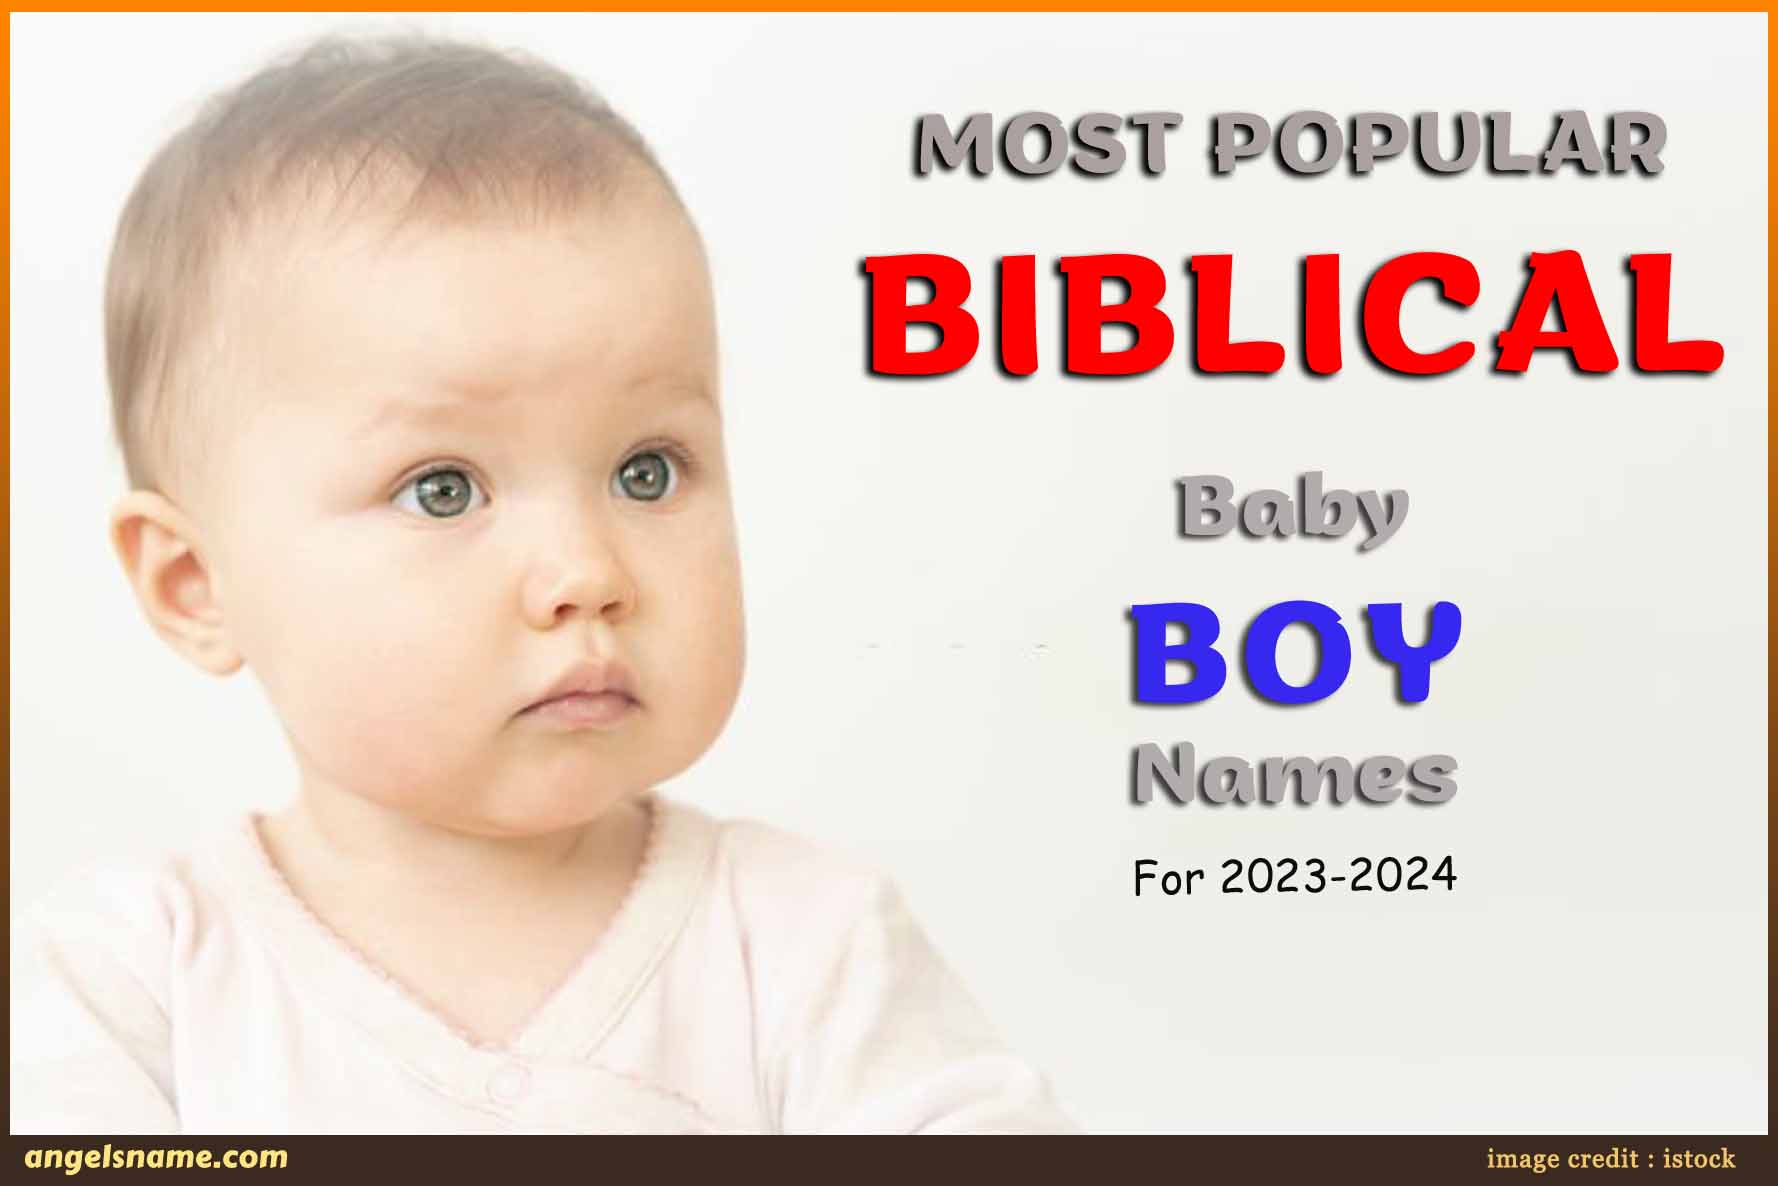 Most Popular Biblical Baby Names for 2023-24